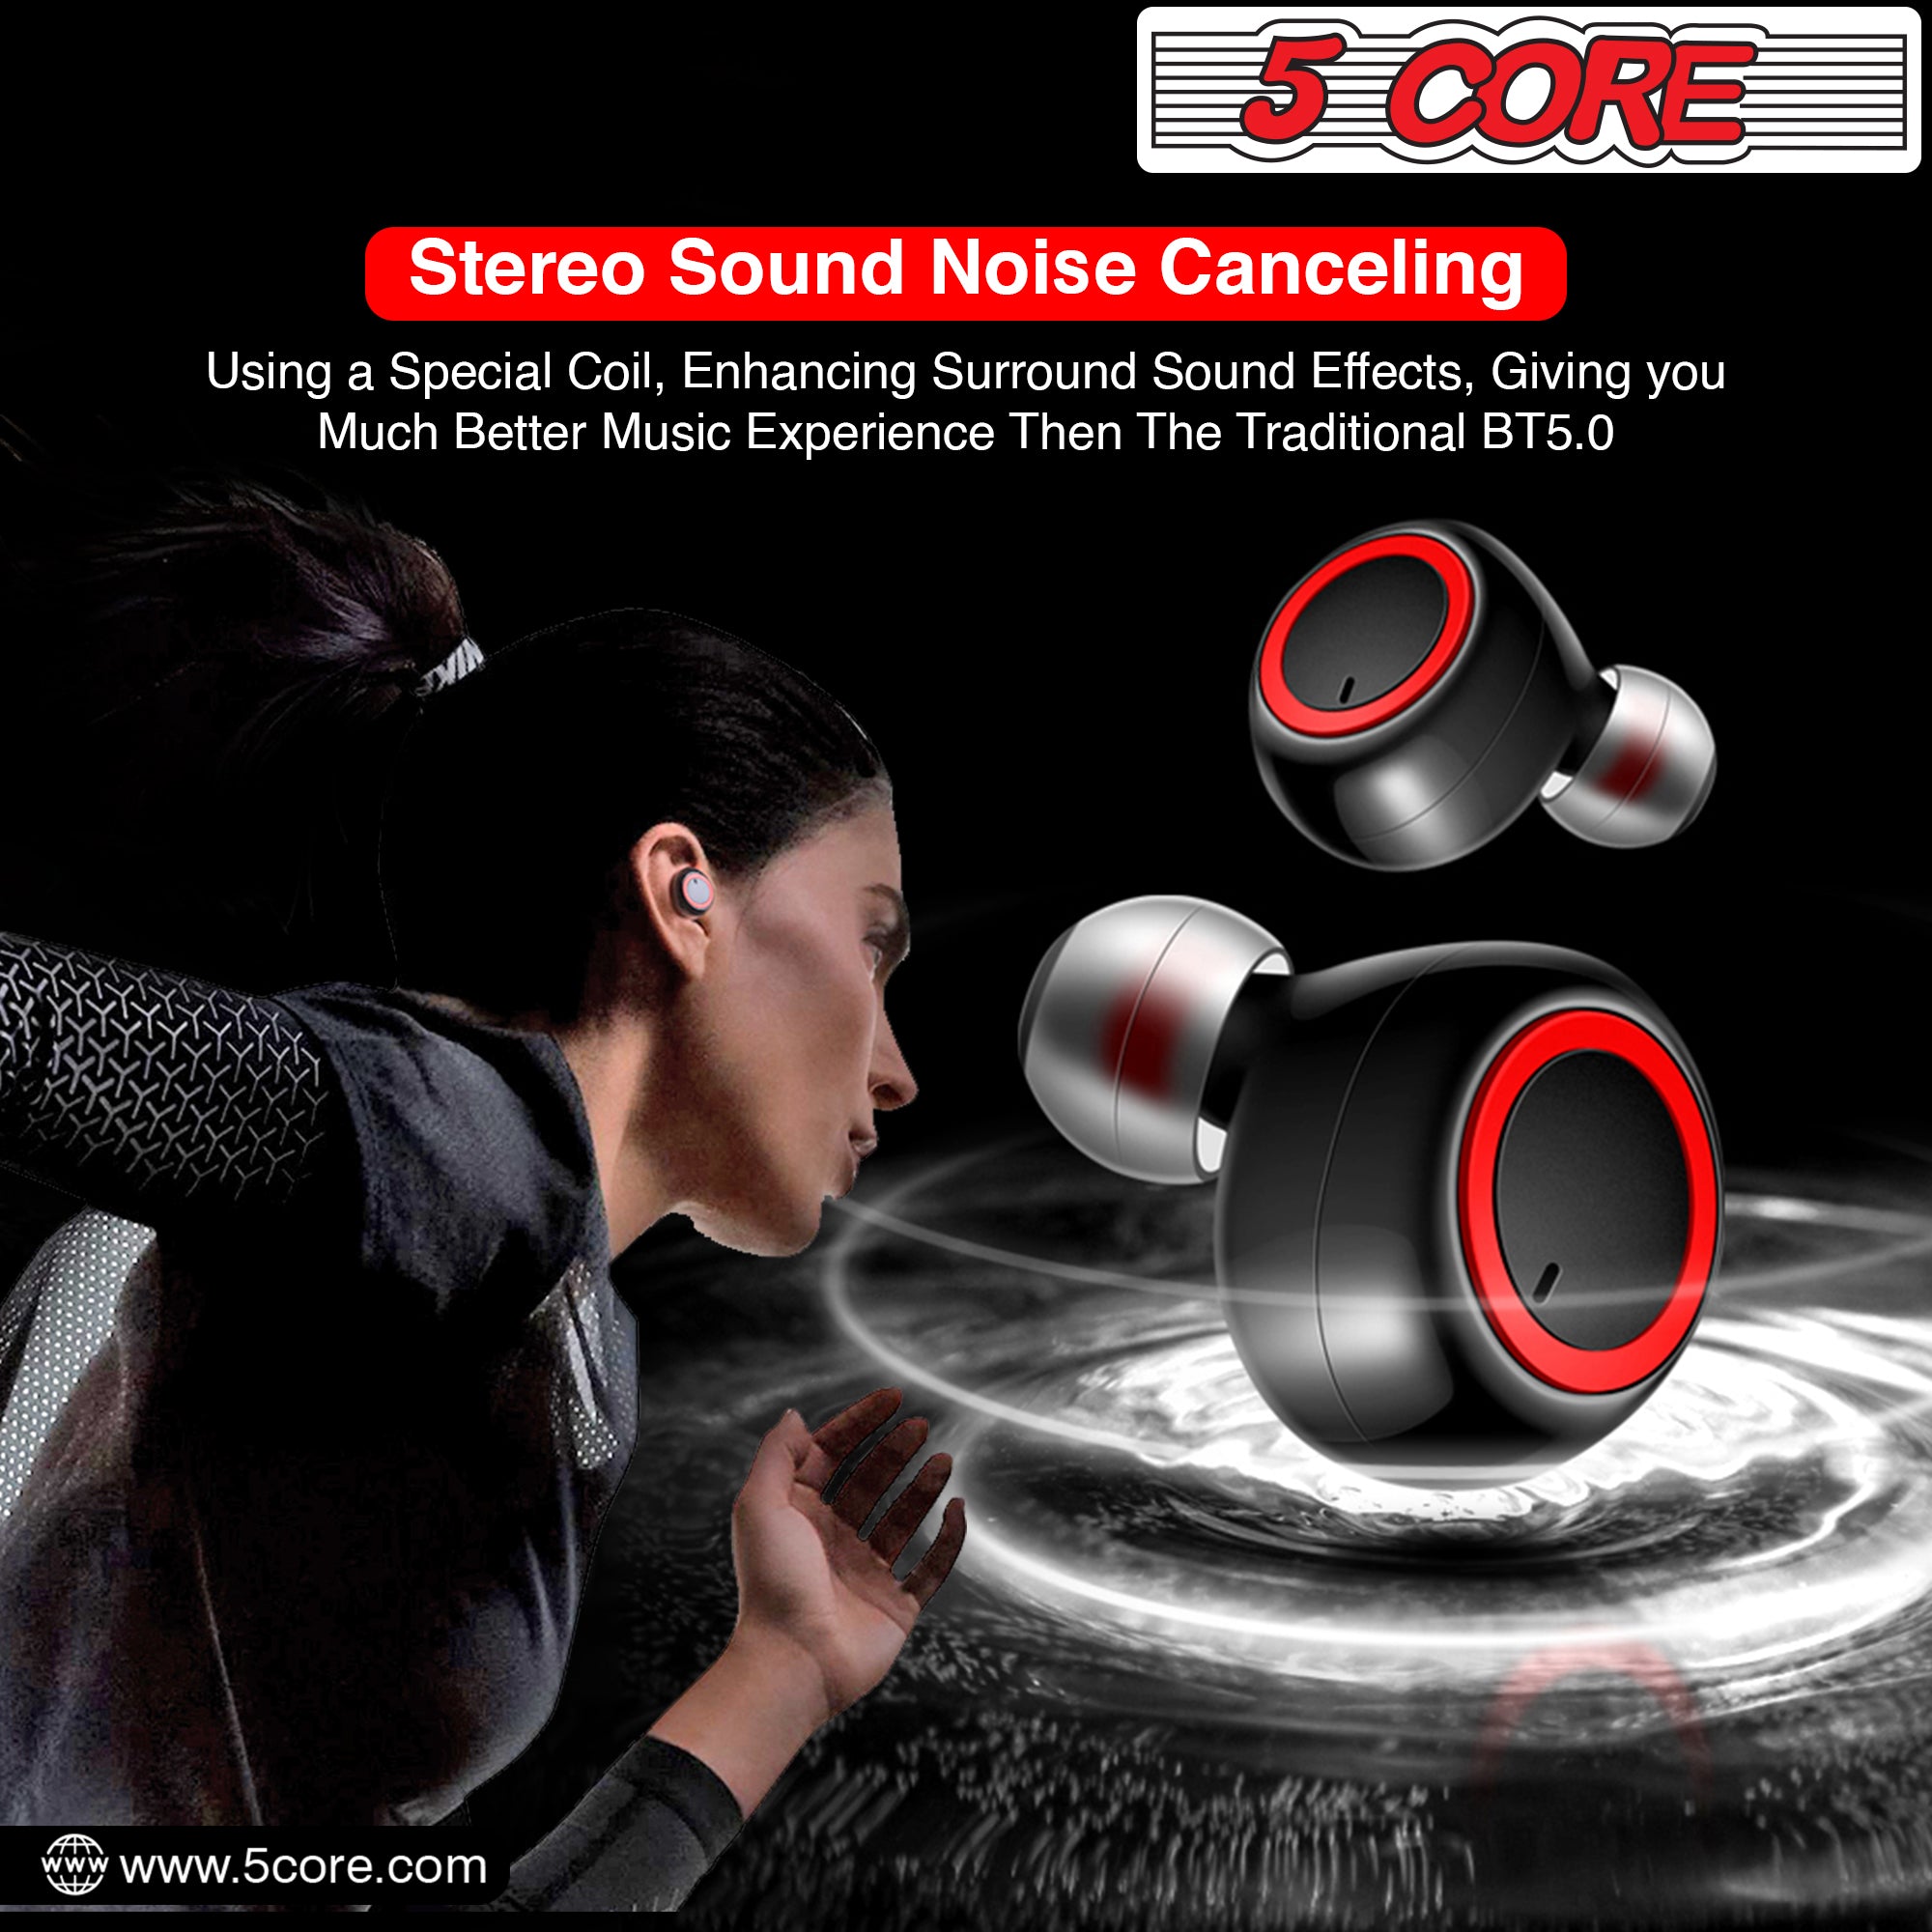 High-Quality Sound with 5 Core Bluetooth Connectivity